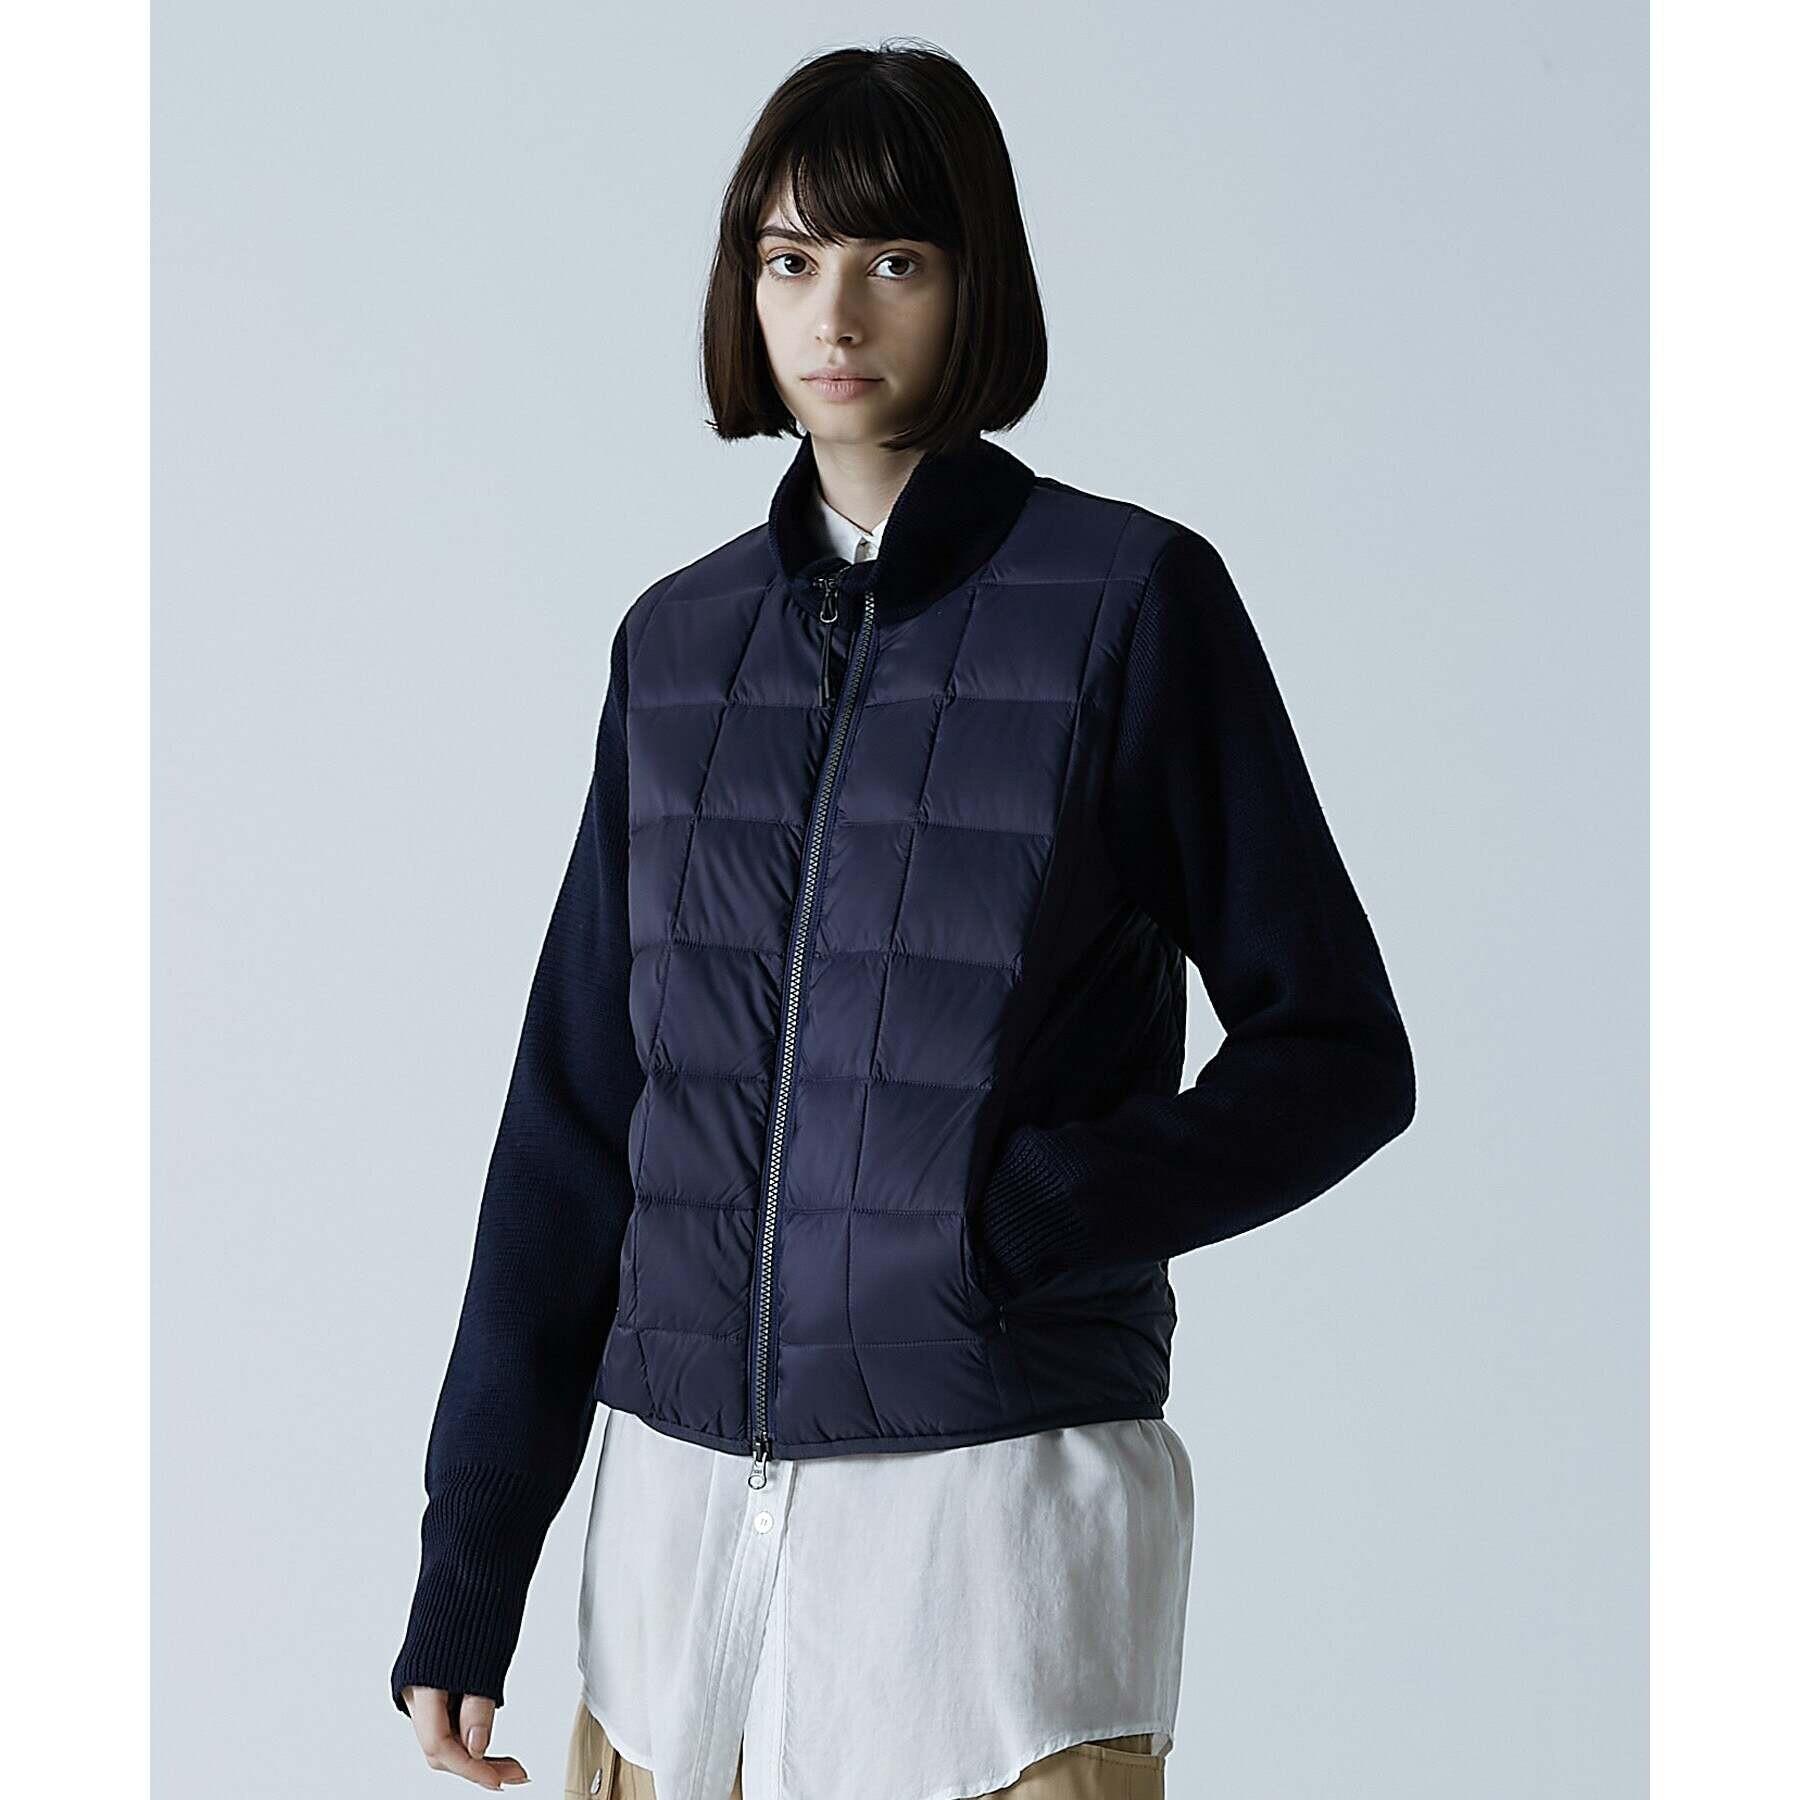 BasicPuffer Jacket with high collar and knitted zip-off sleeves Taion